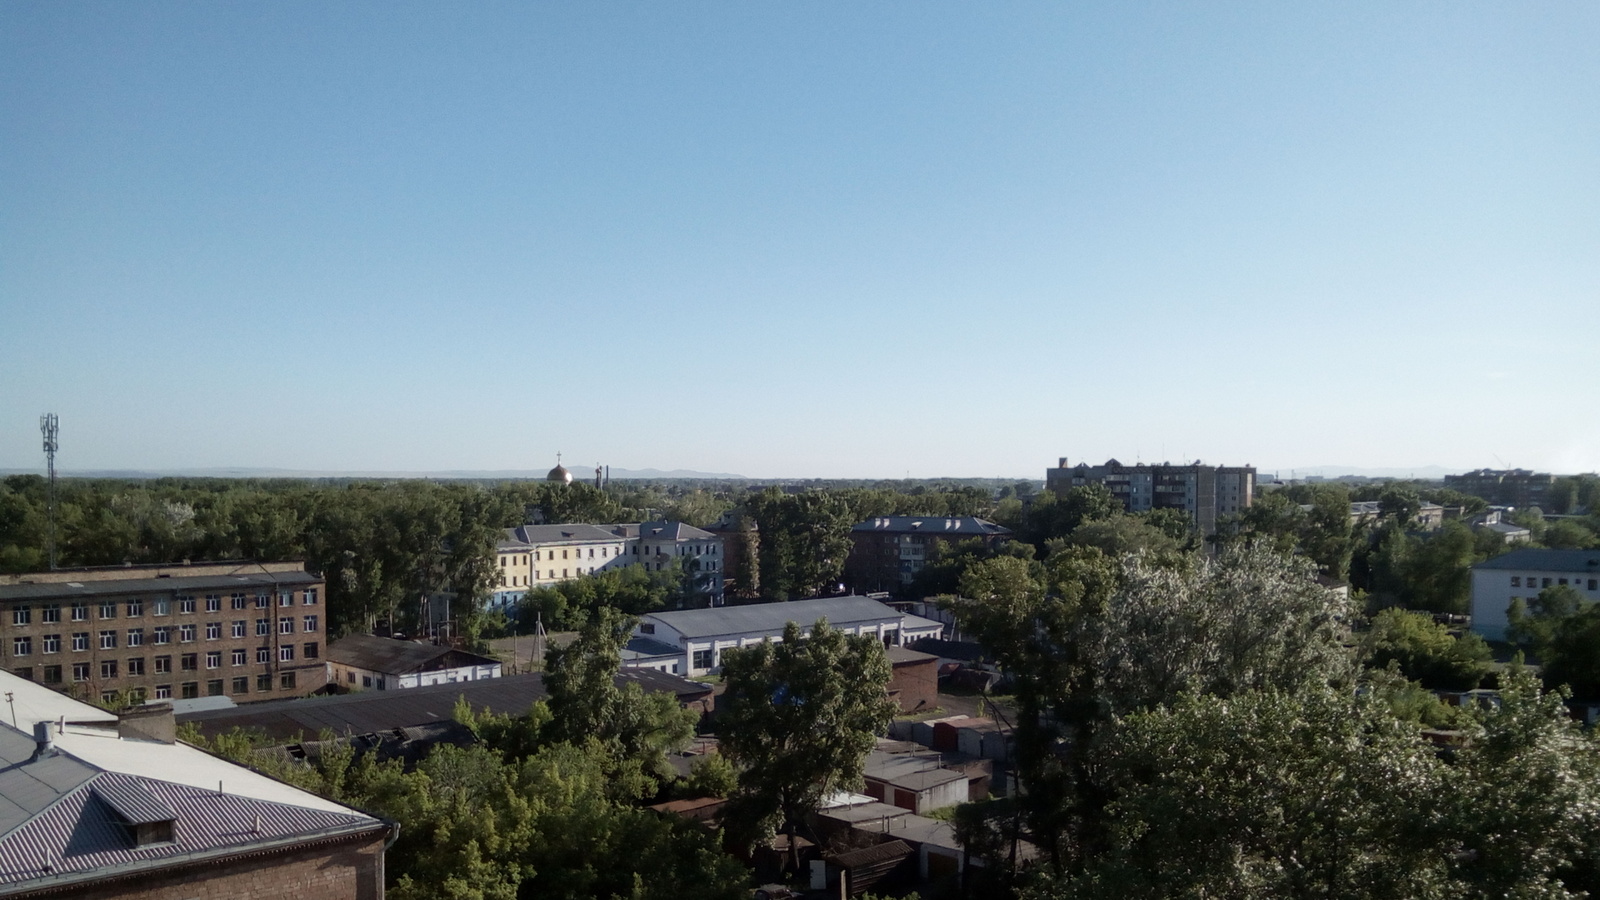 While Central Russia freezes, it's summer in Siberia - My, Summer, Sky, Siberia